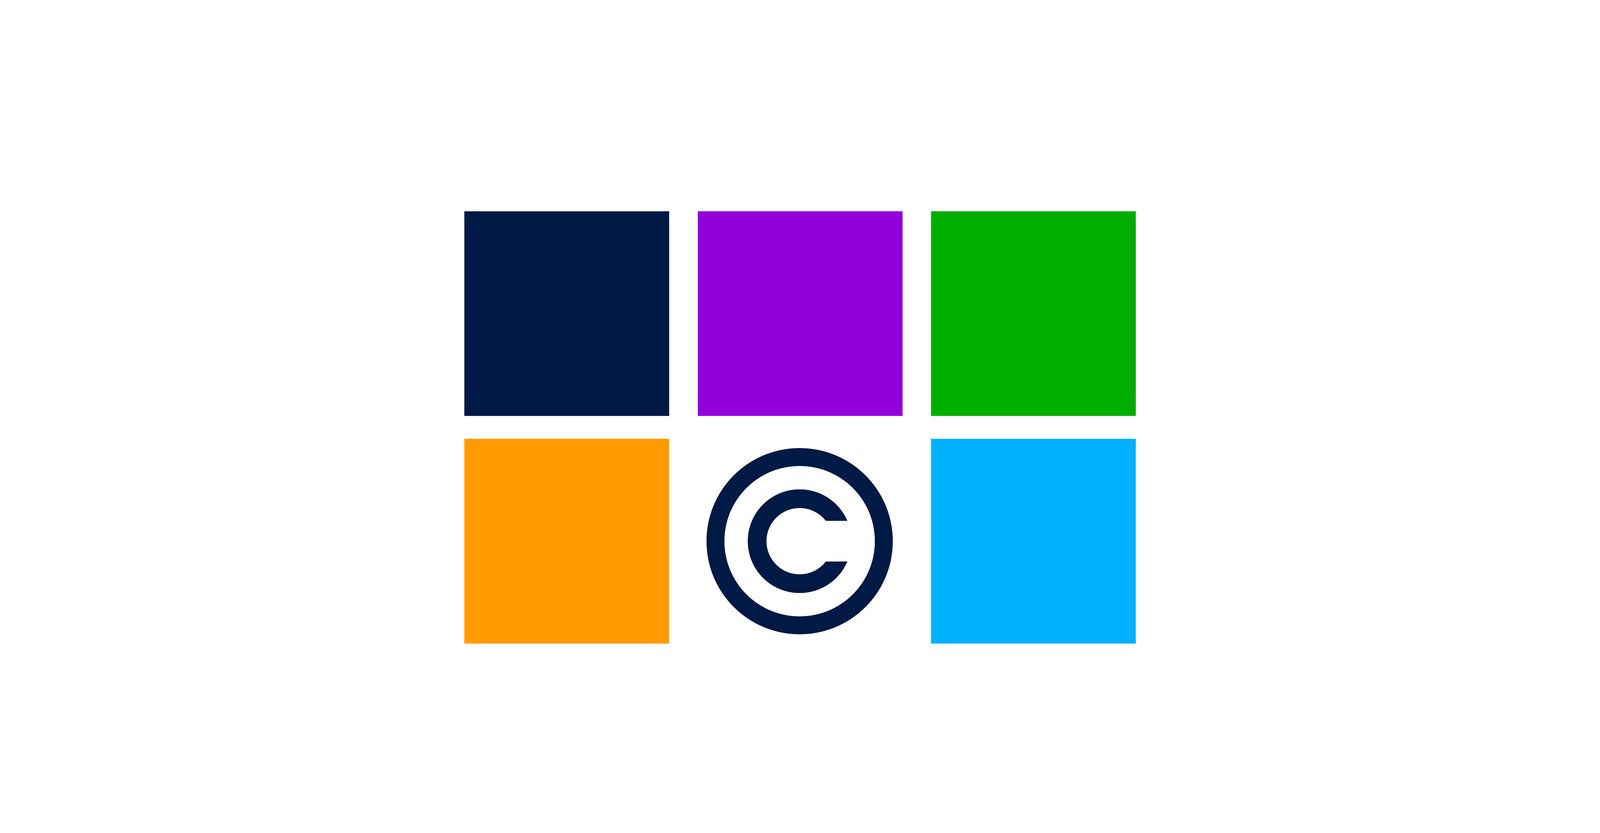 Copyright and Images